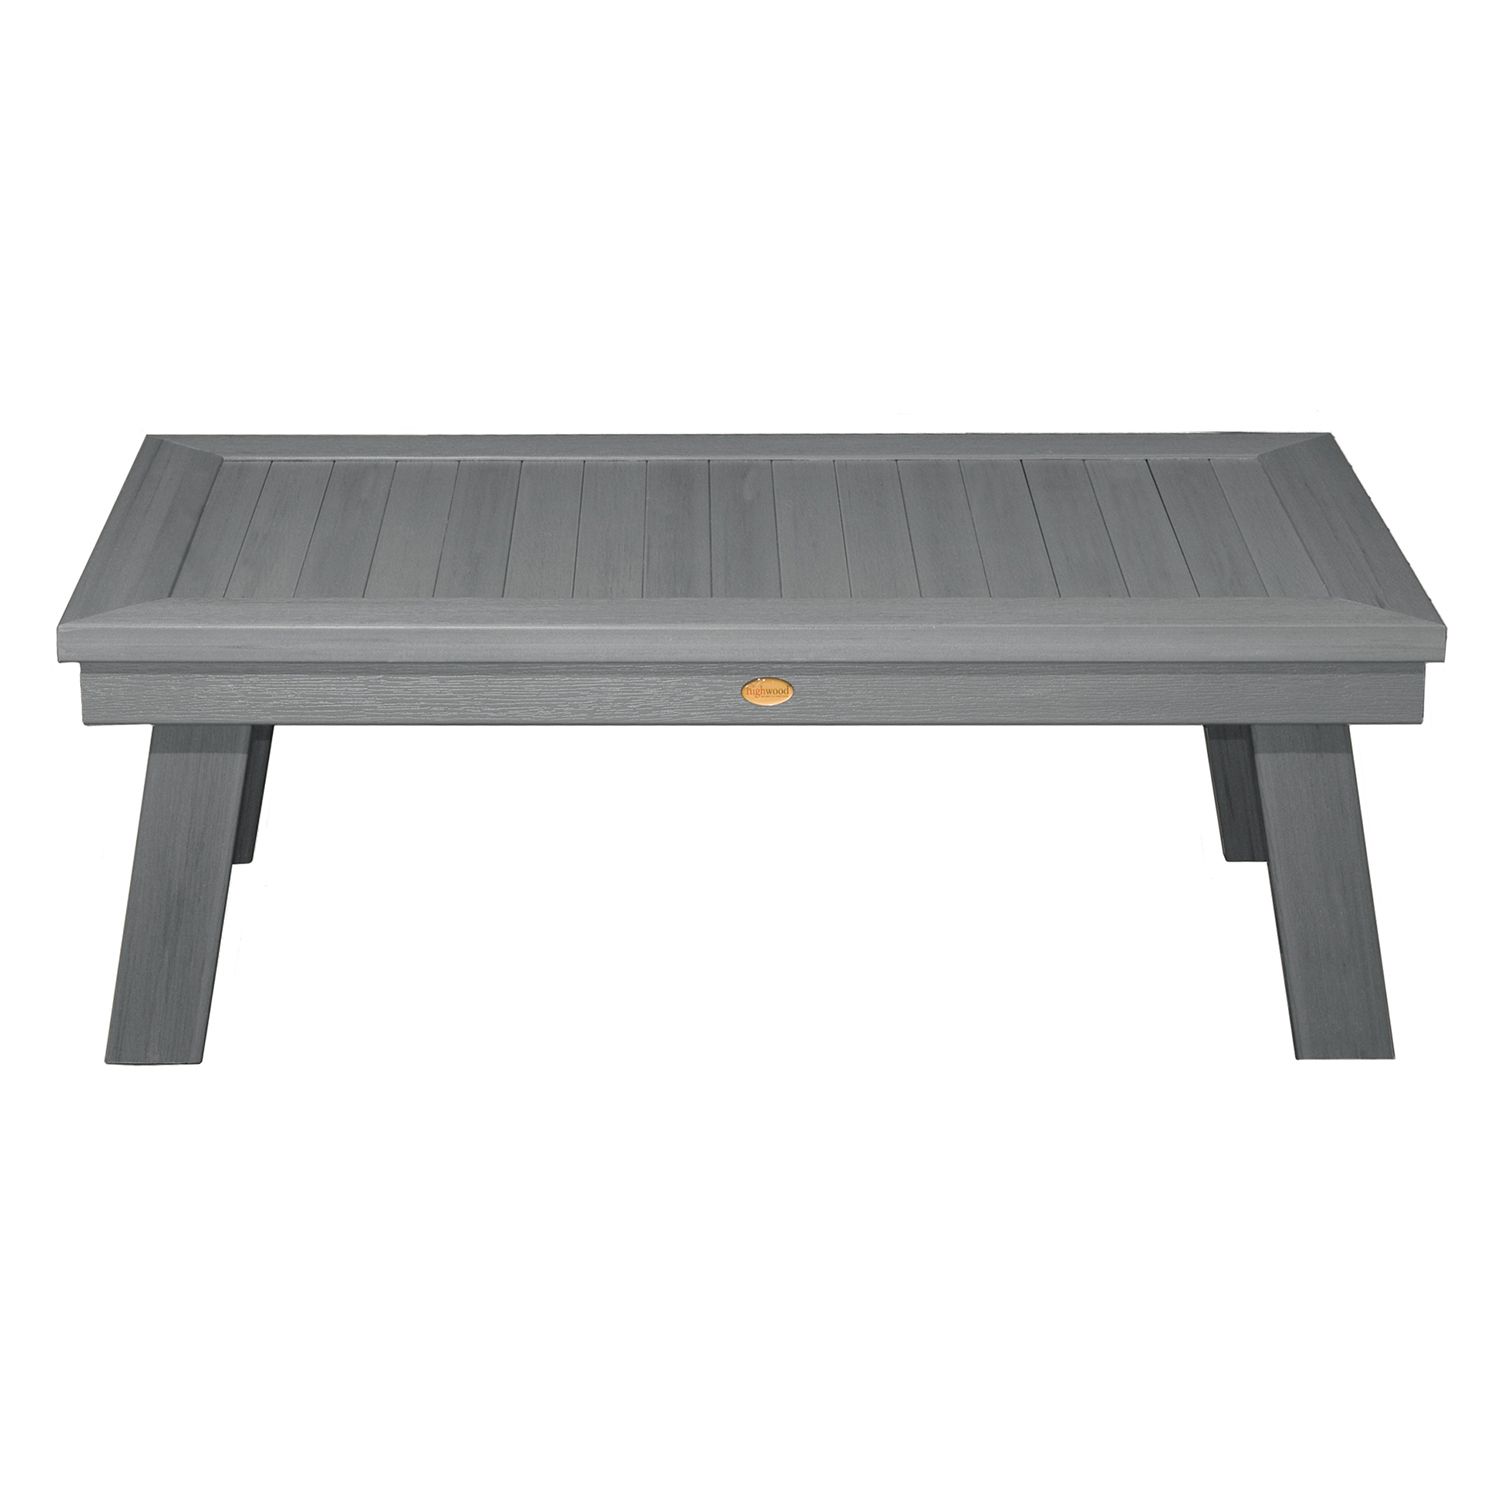 Image for highwood Pocono Deep Seating Conversation Outdoor Table at Kohl's.